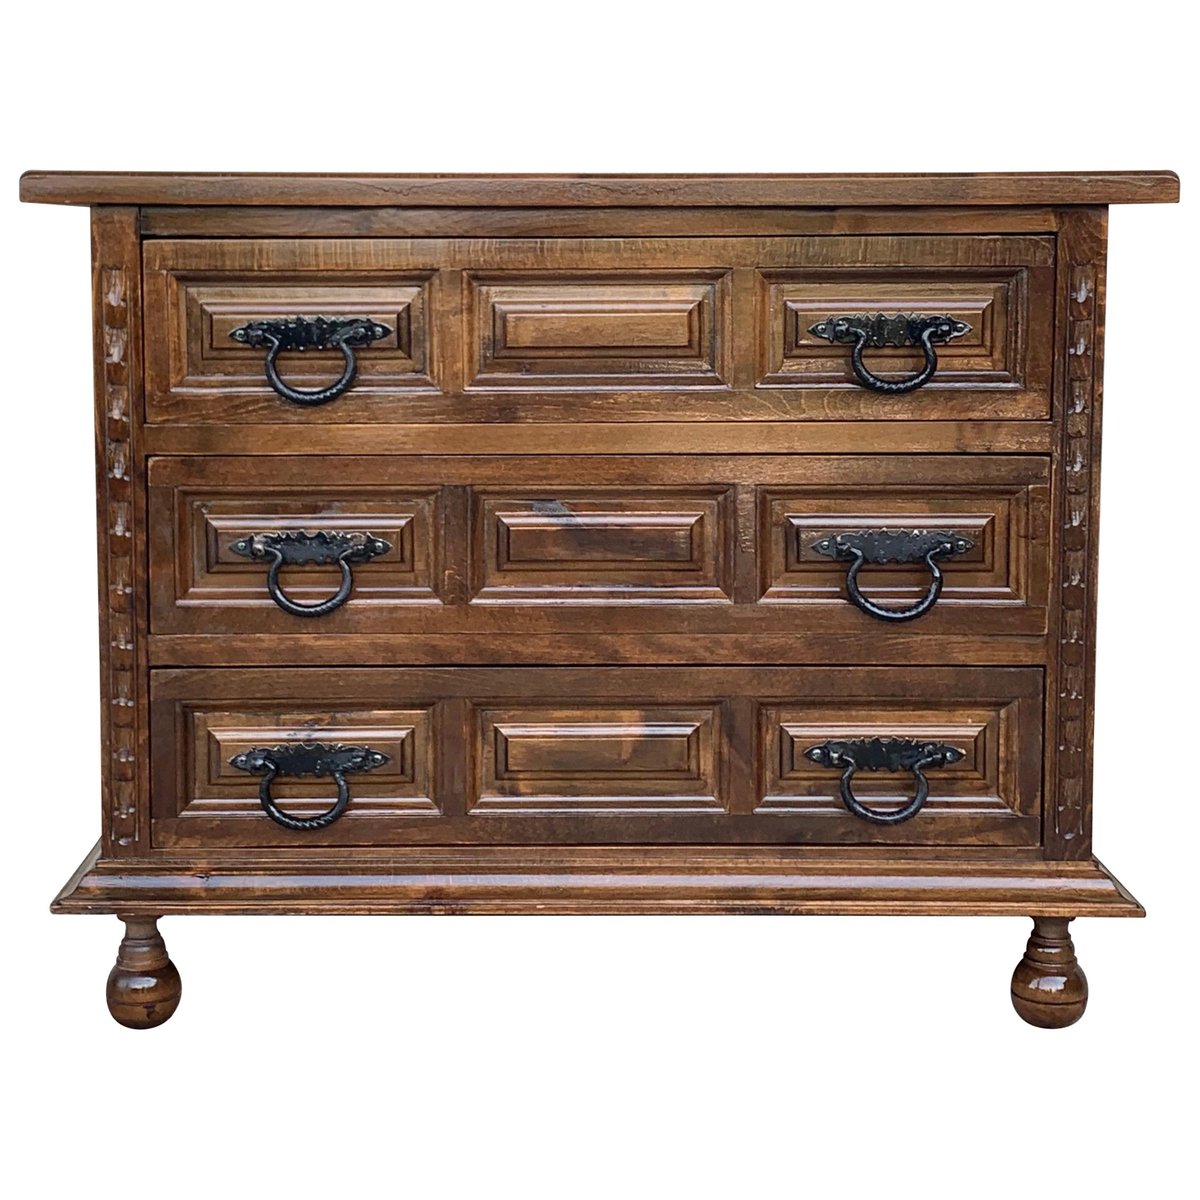 19th century catalan baroque carved walnut tuscan chest of drawers with two drawers PSK-1002638